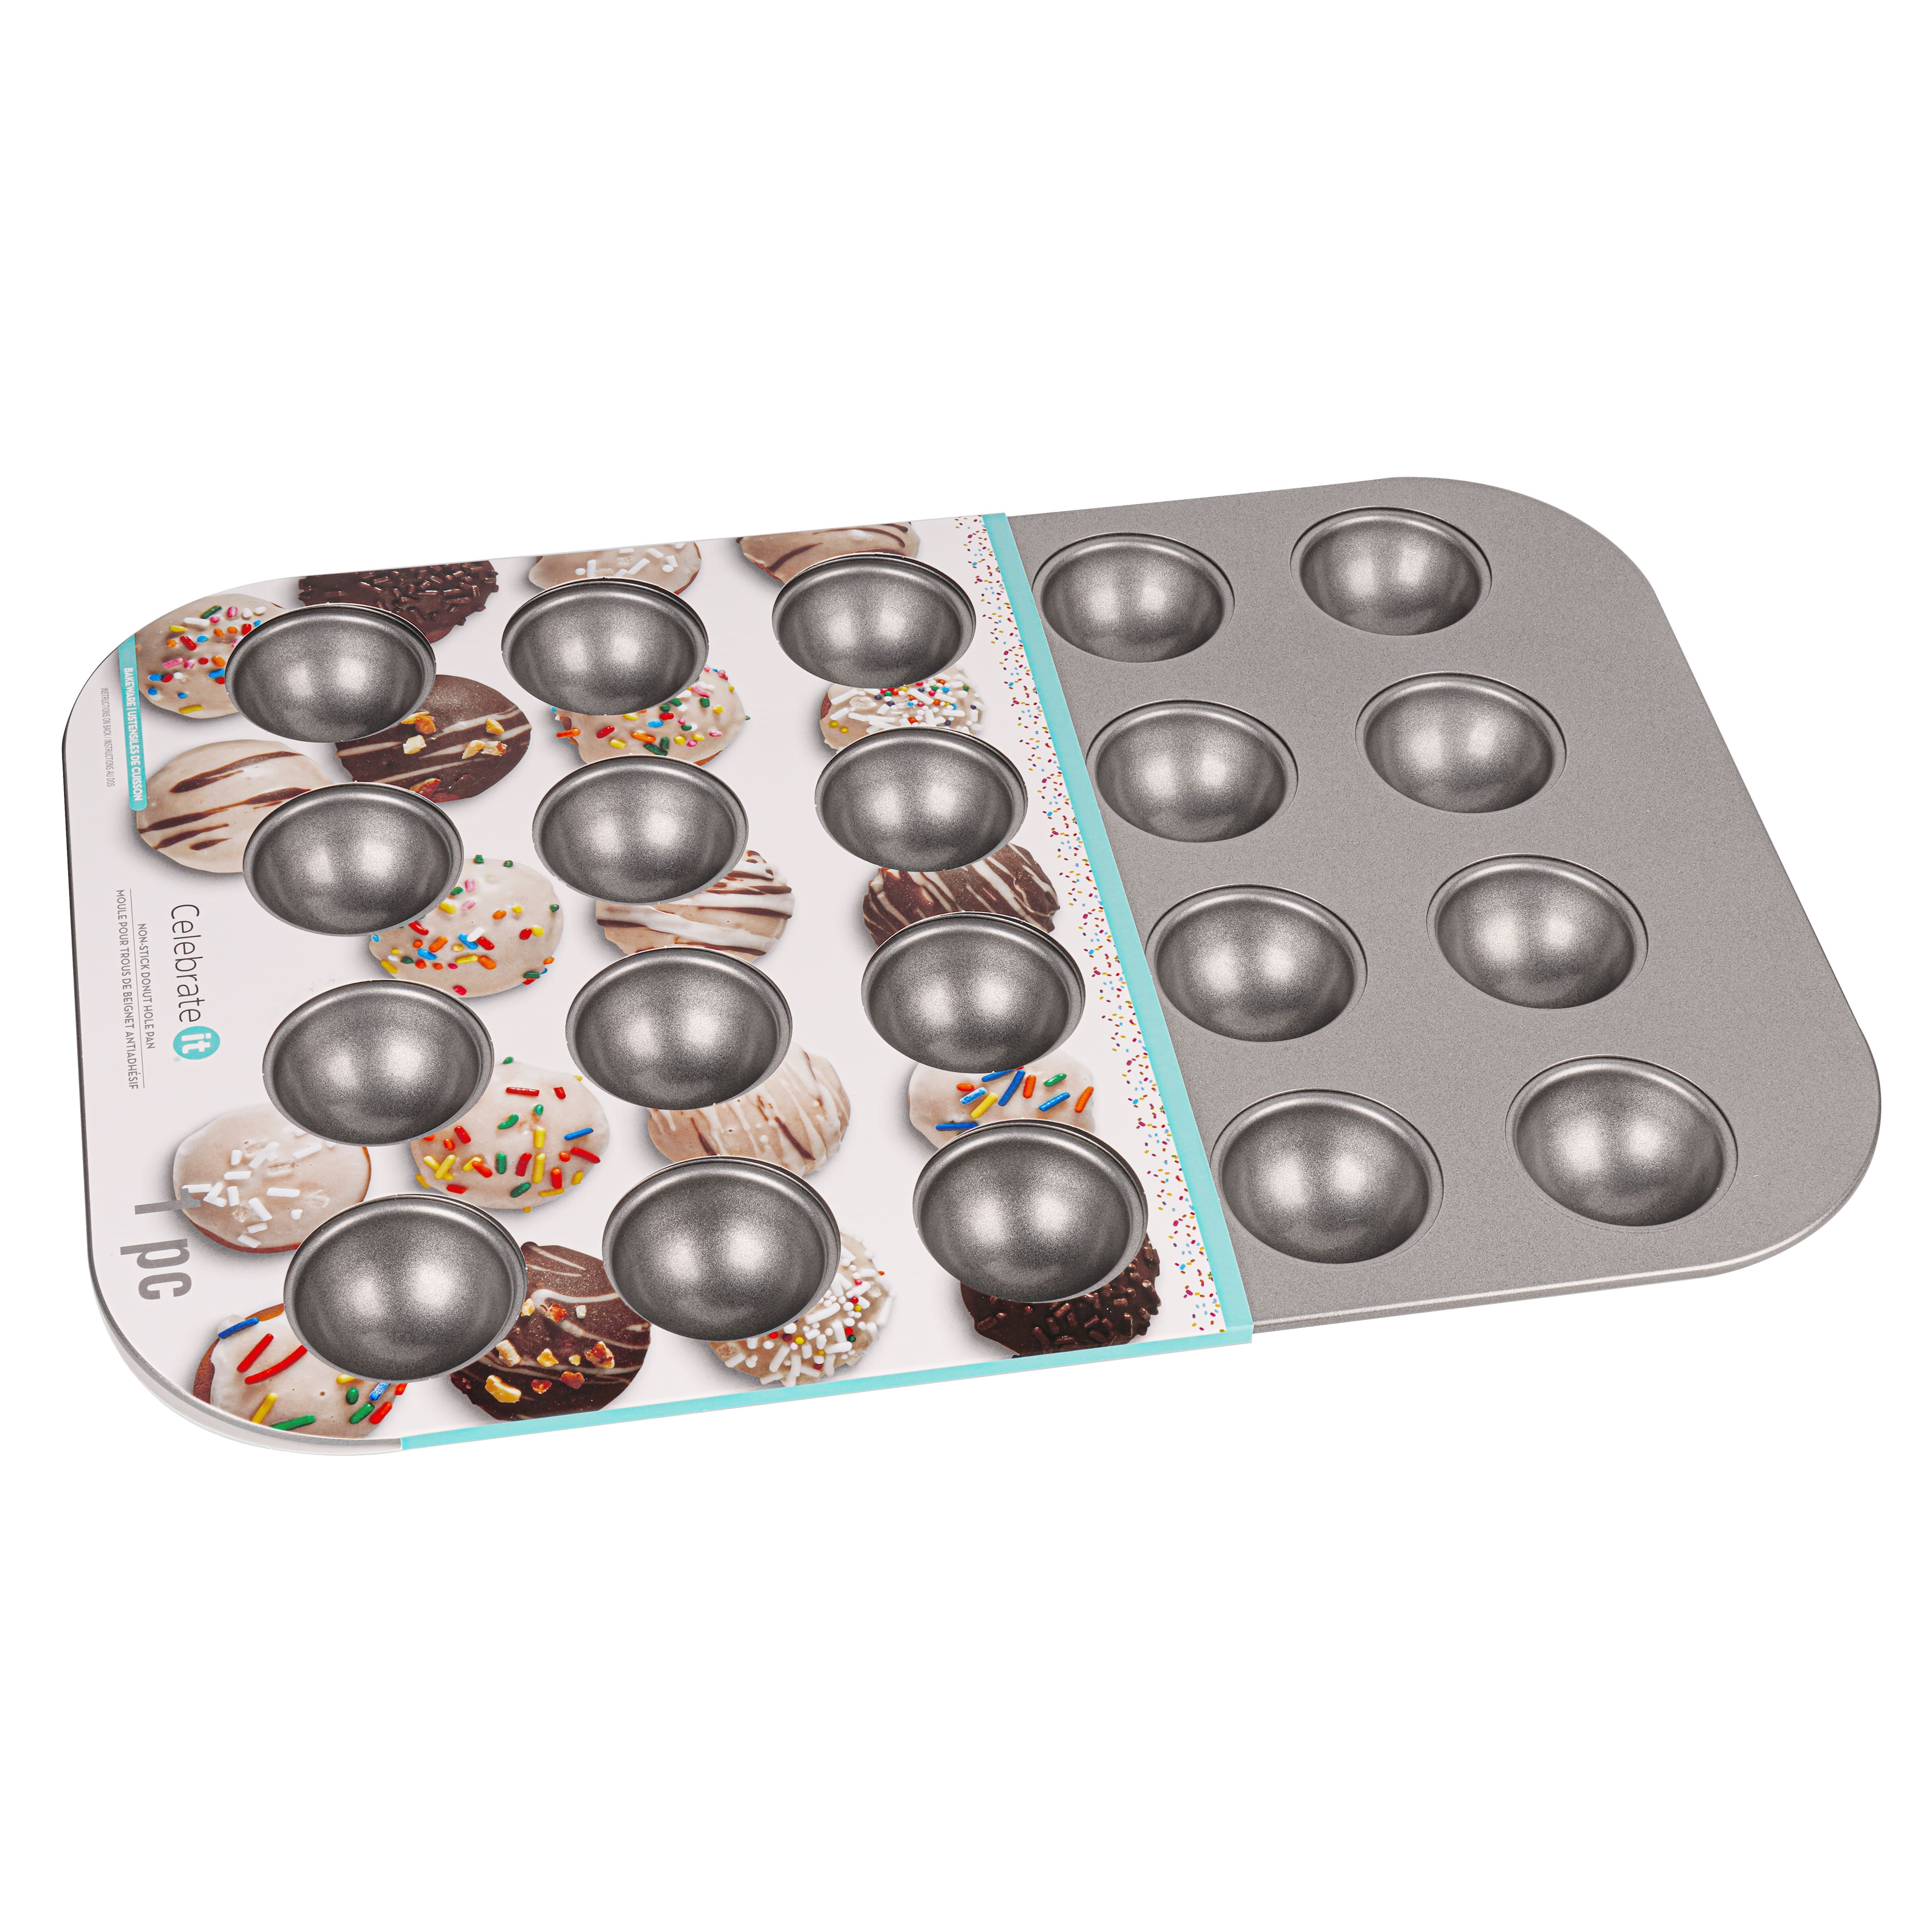 Non-Stick Donut Hole Pan by Celebrate It&#xAE;